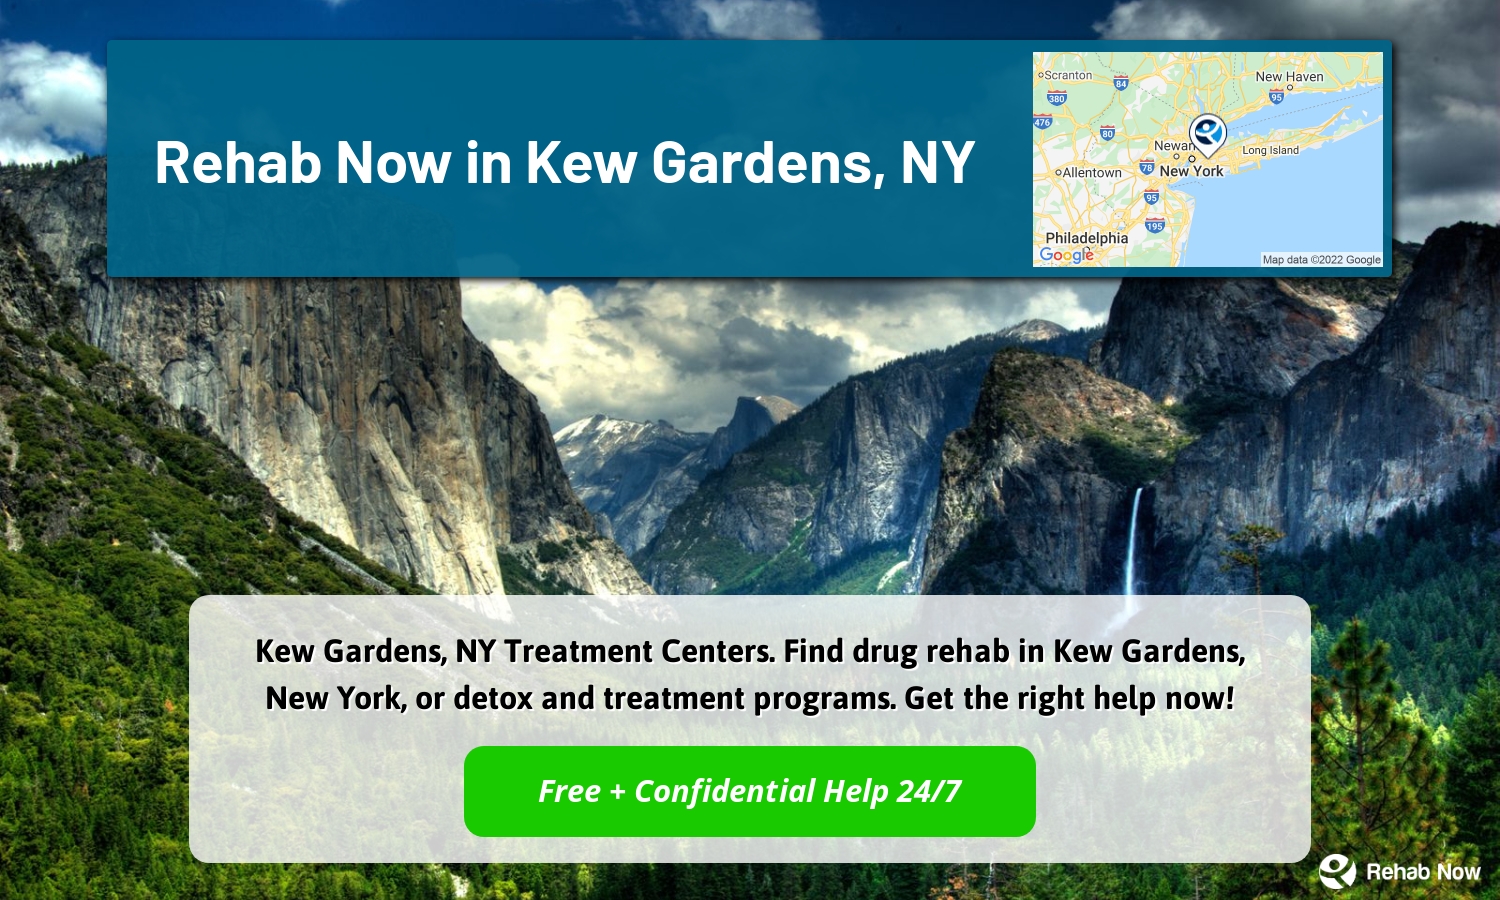 Kew Gardens, NY Treatment Centers. Find drug rehab in Kew Gardens, New York, or detox and treatment programs. Get the right help now!